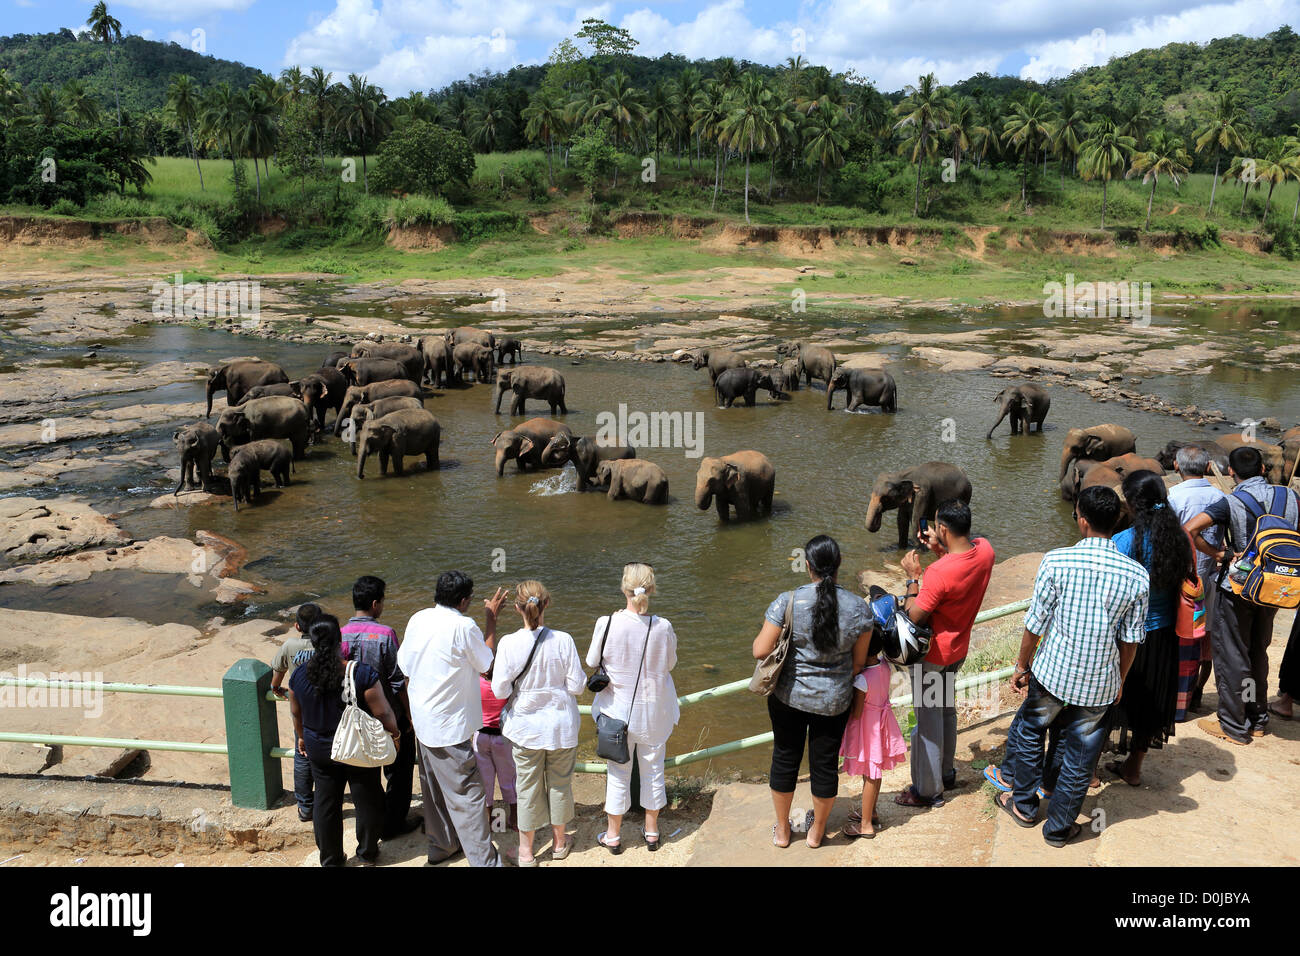 Herd of elephants nthing in a river at Pinnawala elephant orphanage in Sri Lanka. Stock Photo